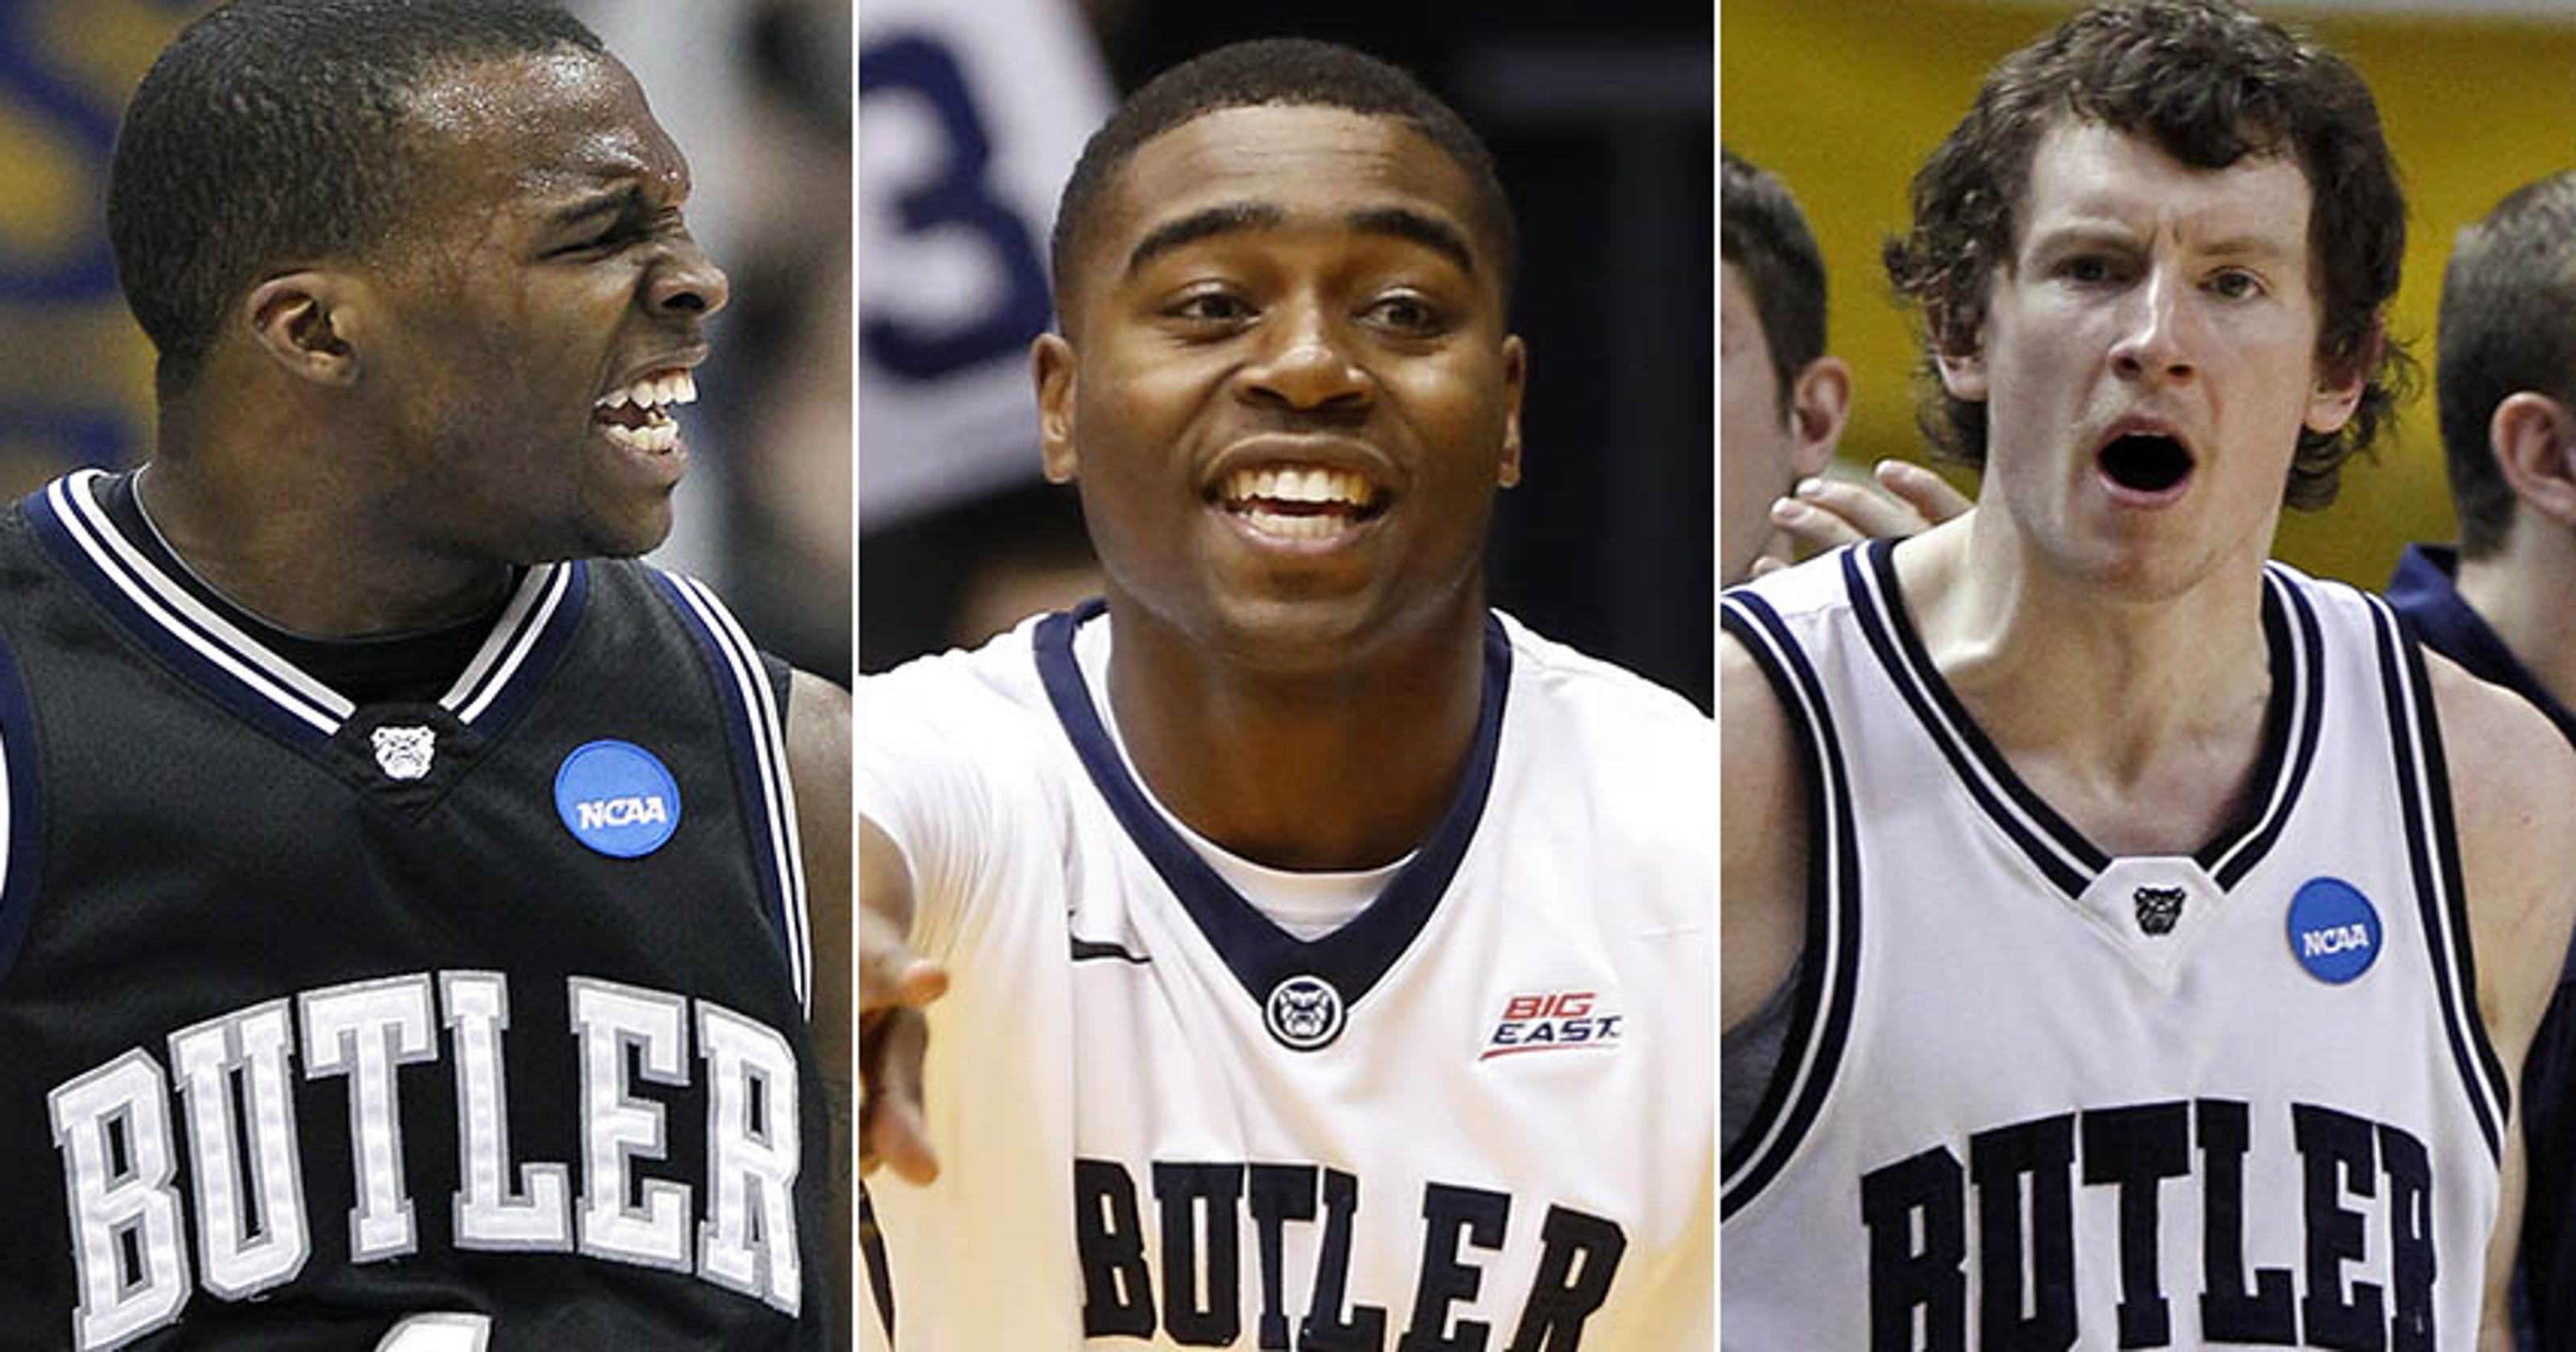 Butler basketball's best players at each jersey number